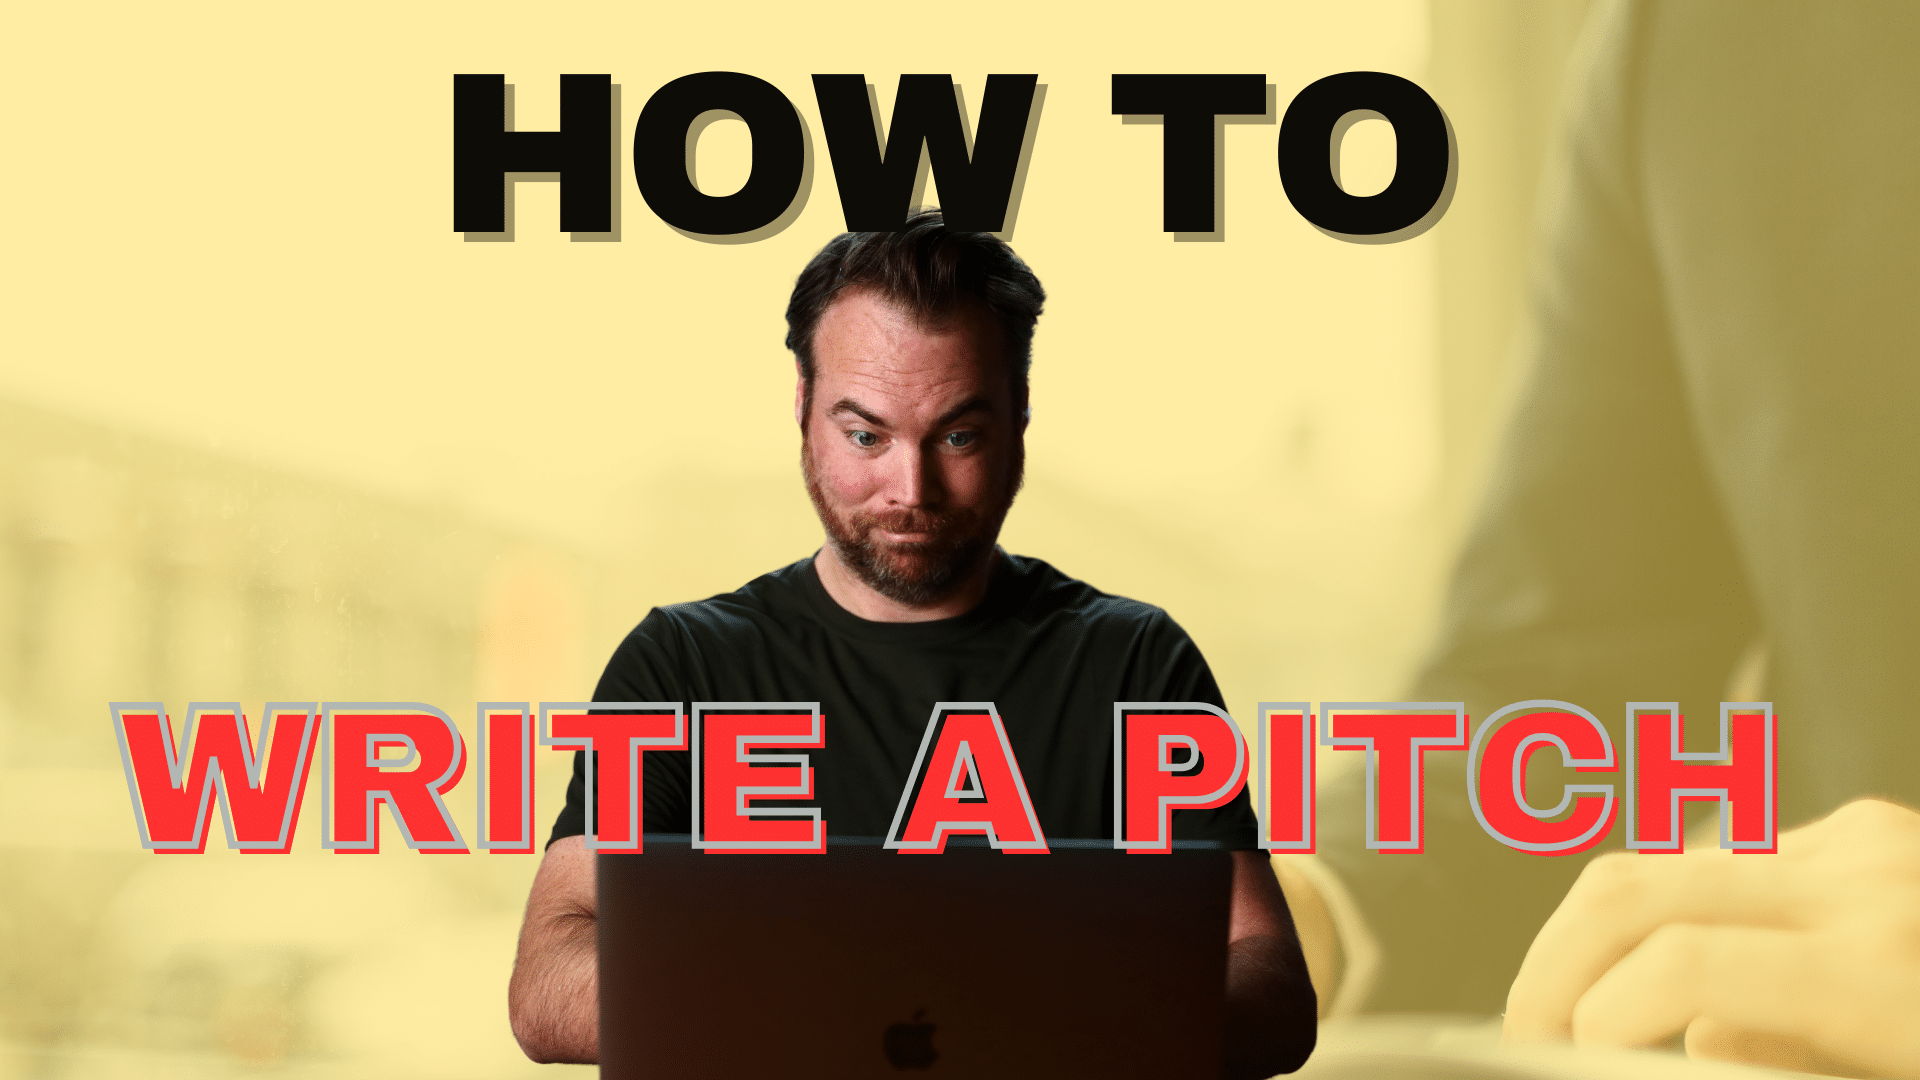 How to Write a Pitch: The Ultimate Guide for Freelance Writers